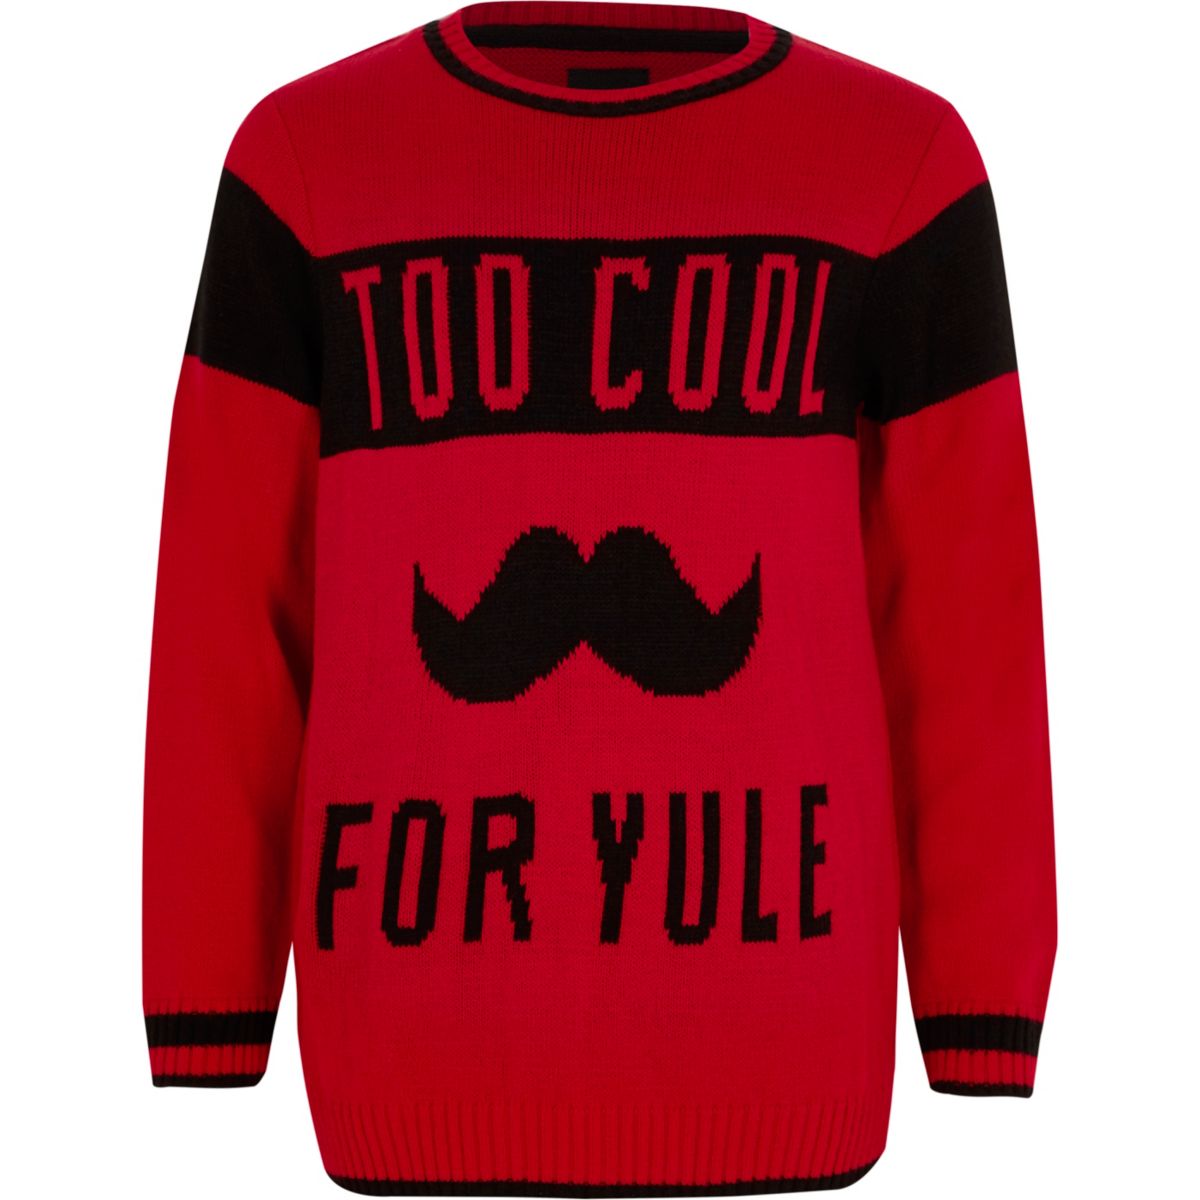 Boys red ‘too cool for yule’ knit jumper - Cardigans & Jumpers - boys